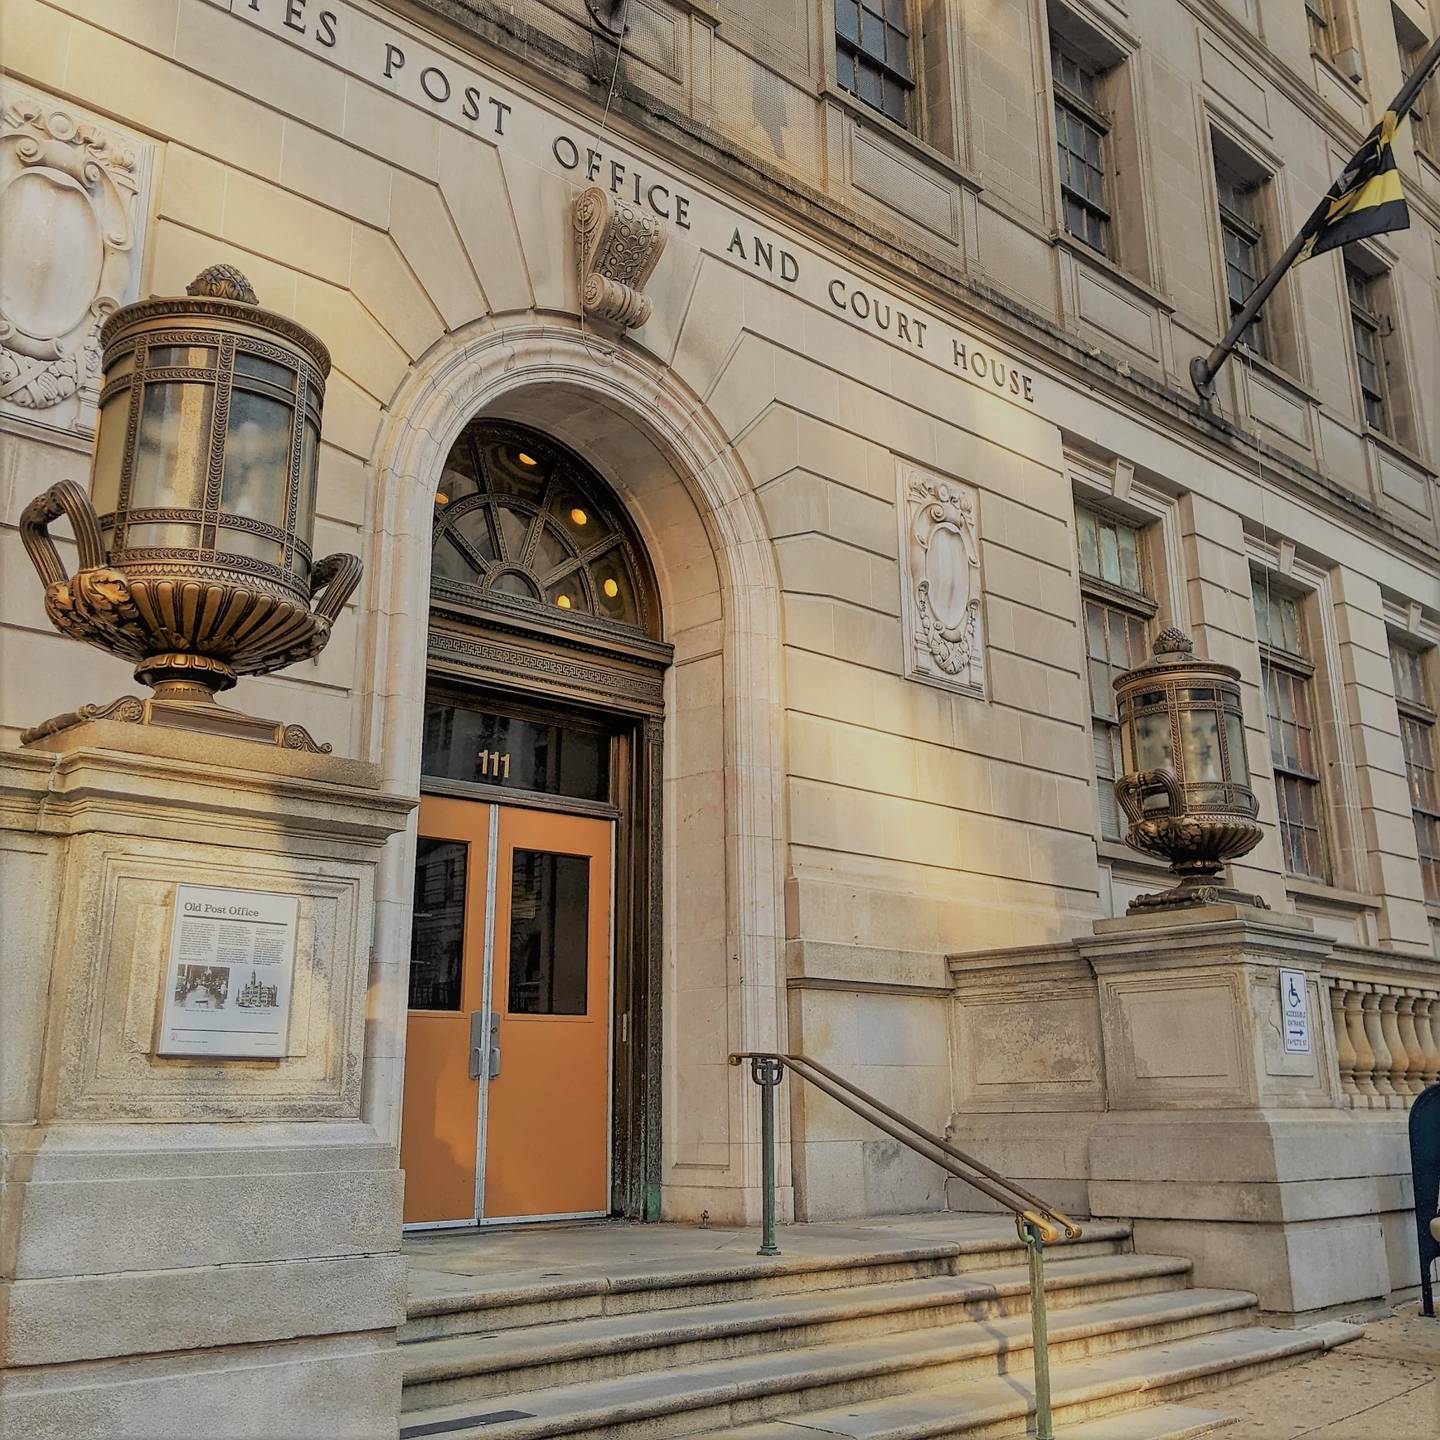 Come here often? The entrance for jury service at Courthouse East, 111 N Calvert Street.